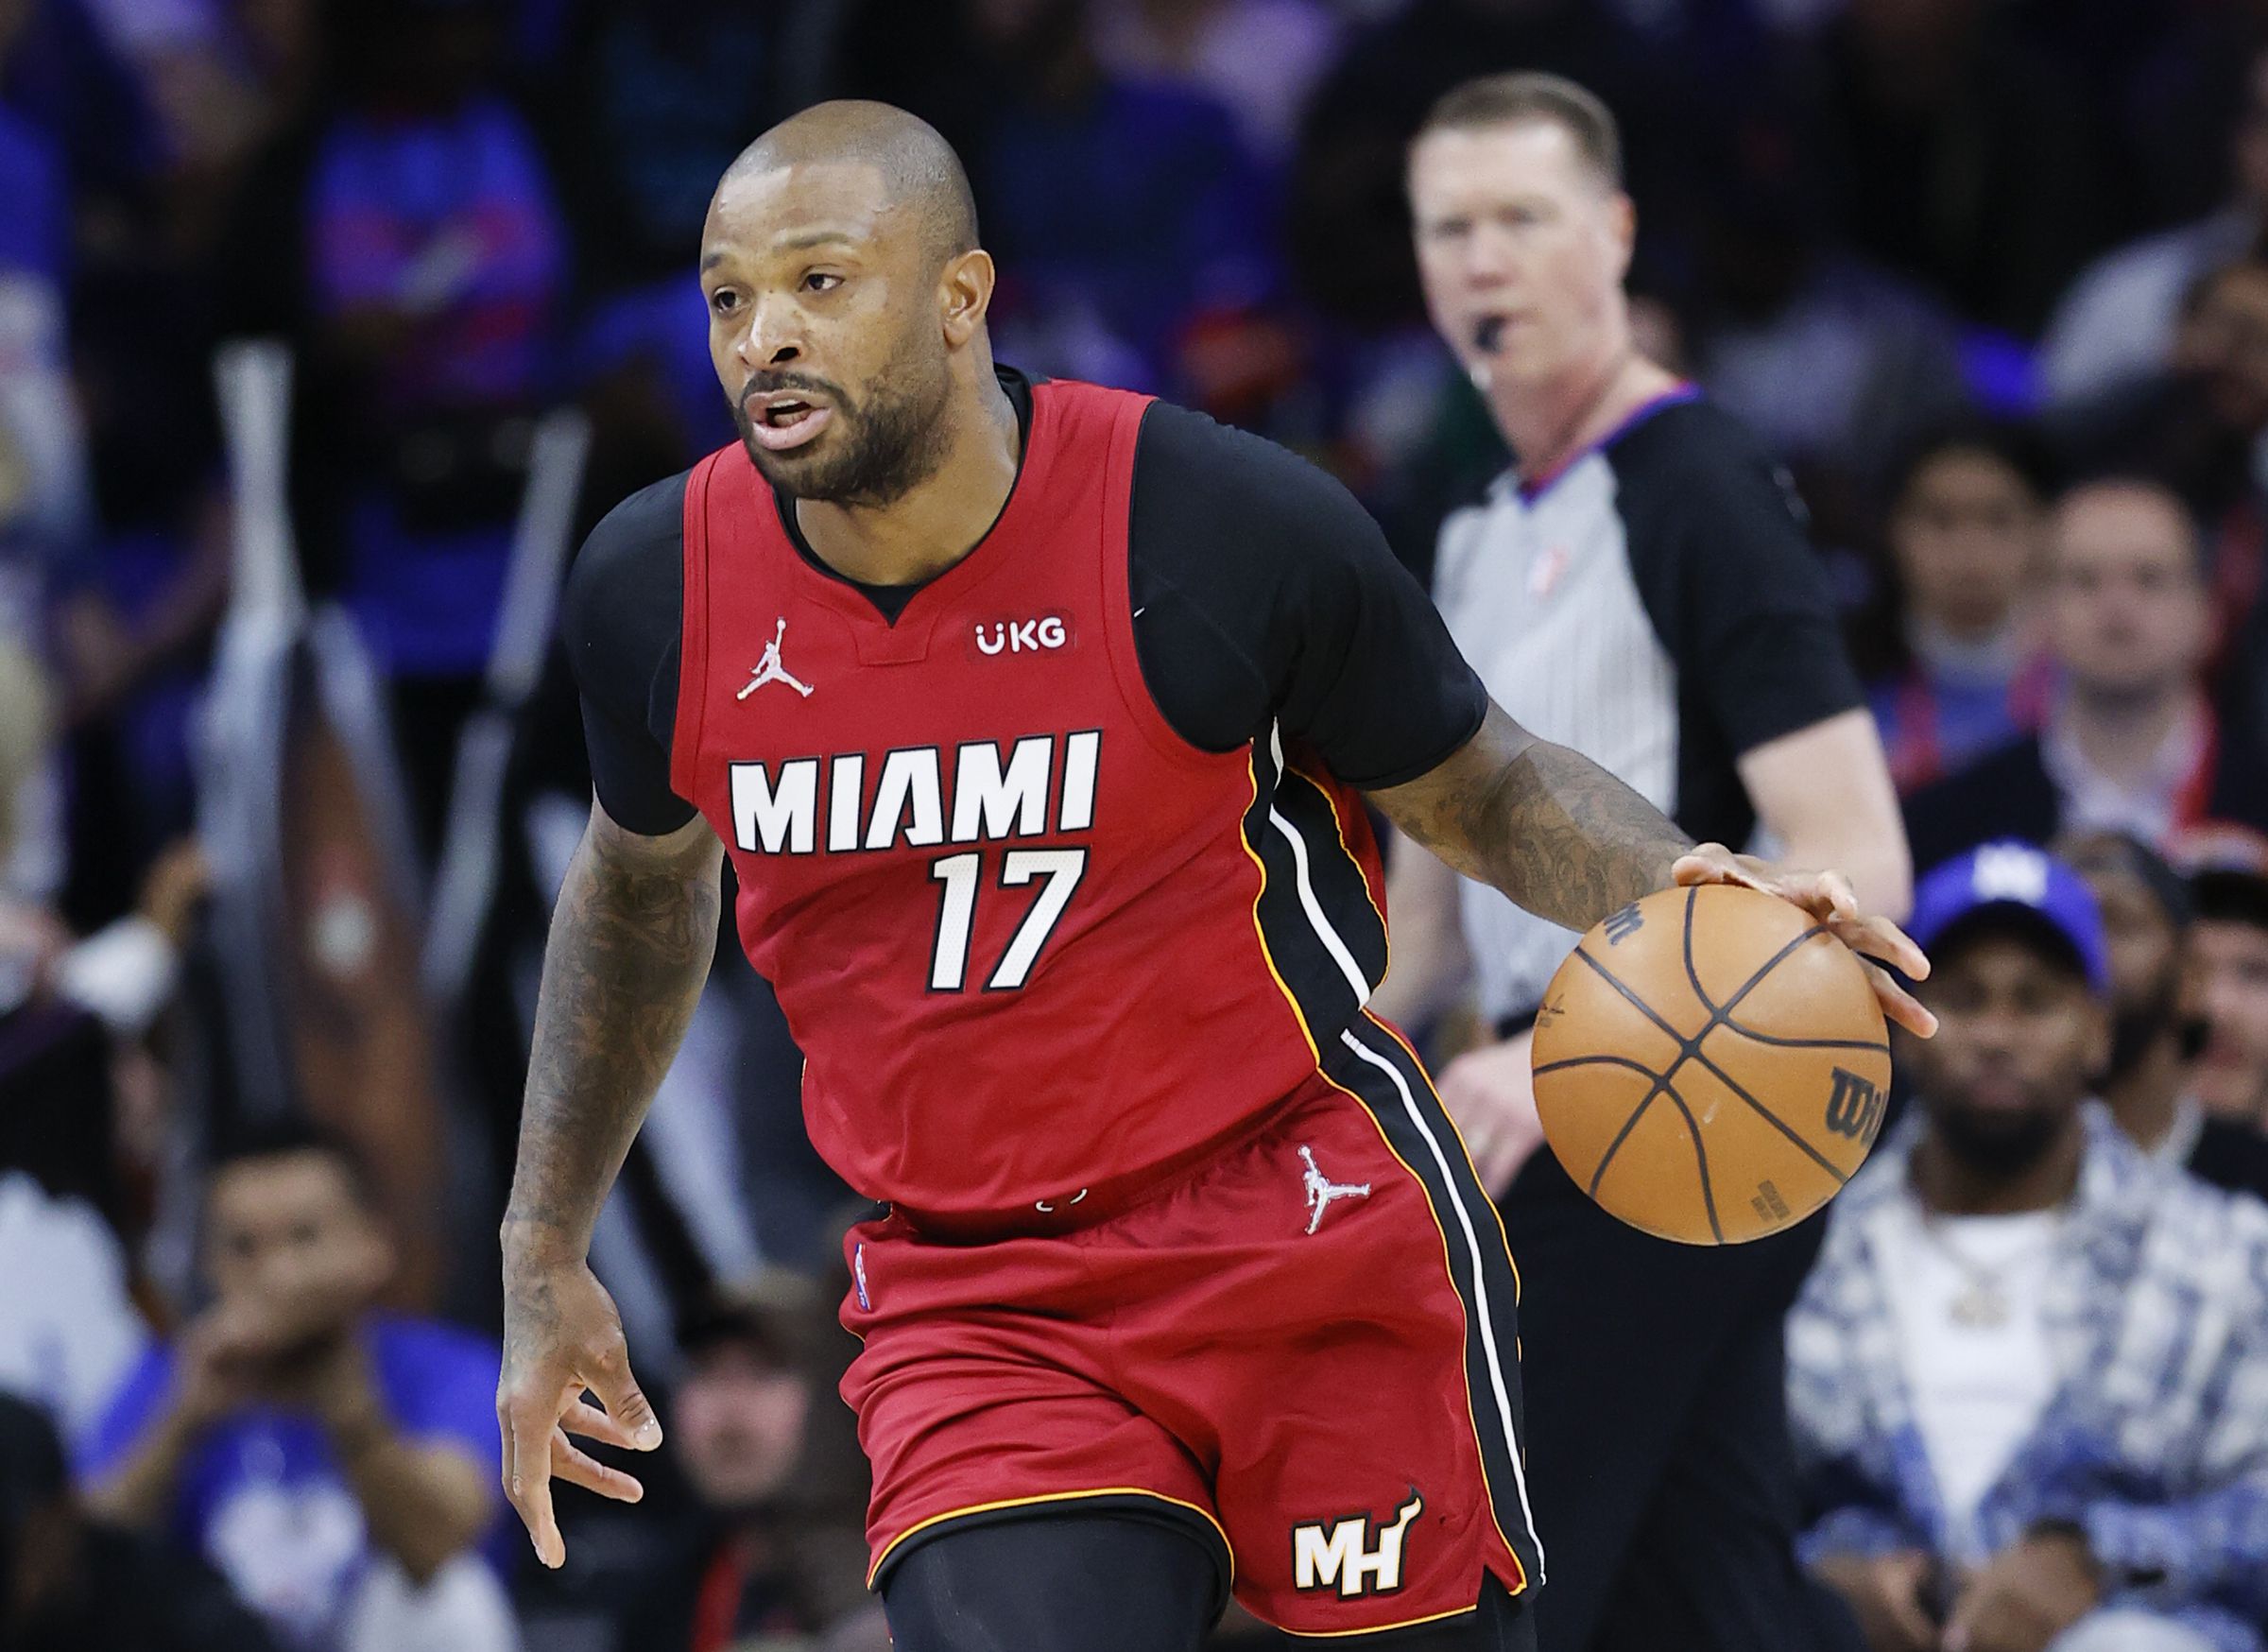 Creech: Rockets' P.J. Tucker shows grit in Game 3